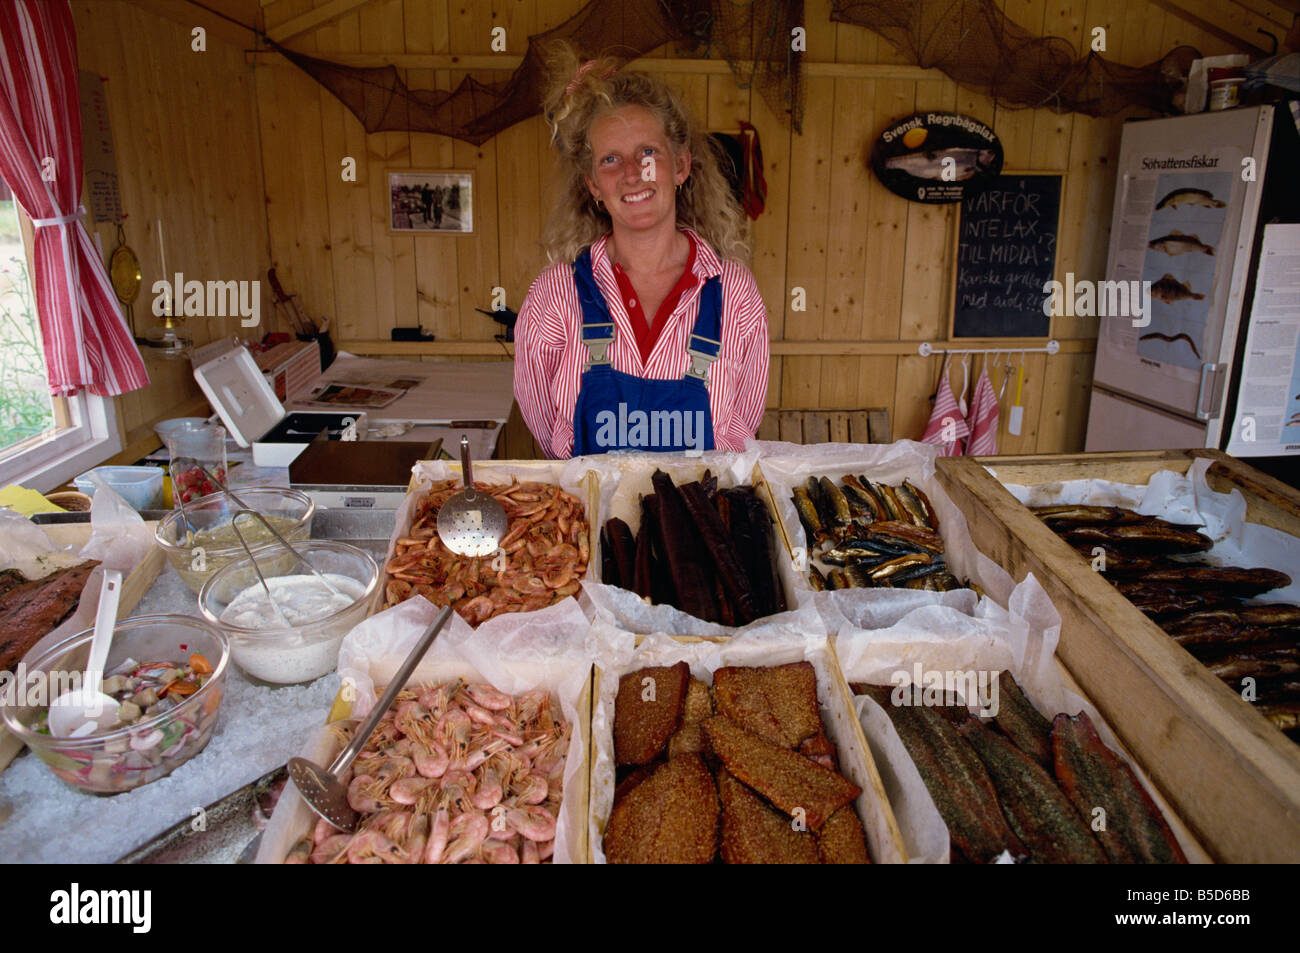 Stall selling seafood and fish on archipelago island of Uto Sweden Scandinavia Europe Stock Photo